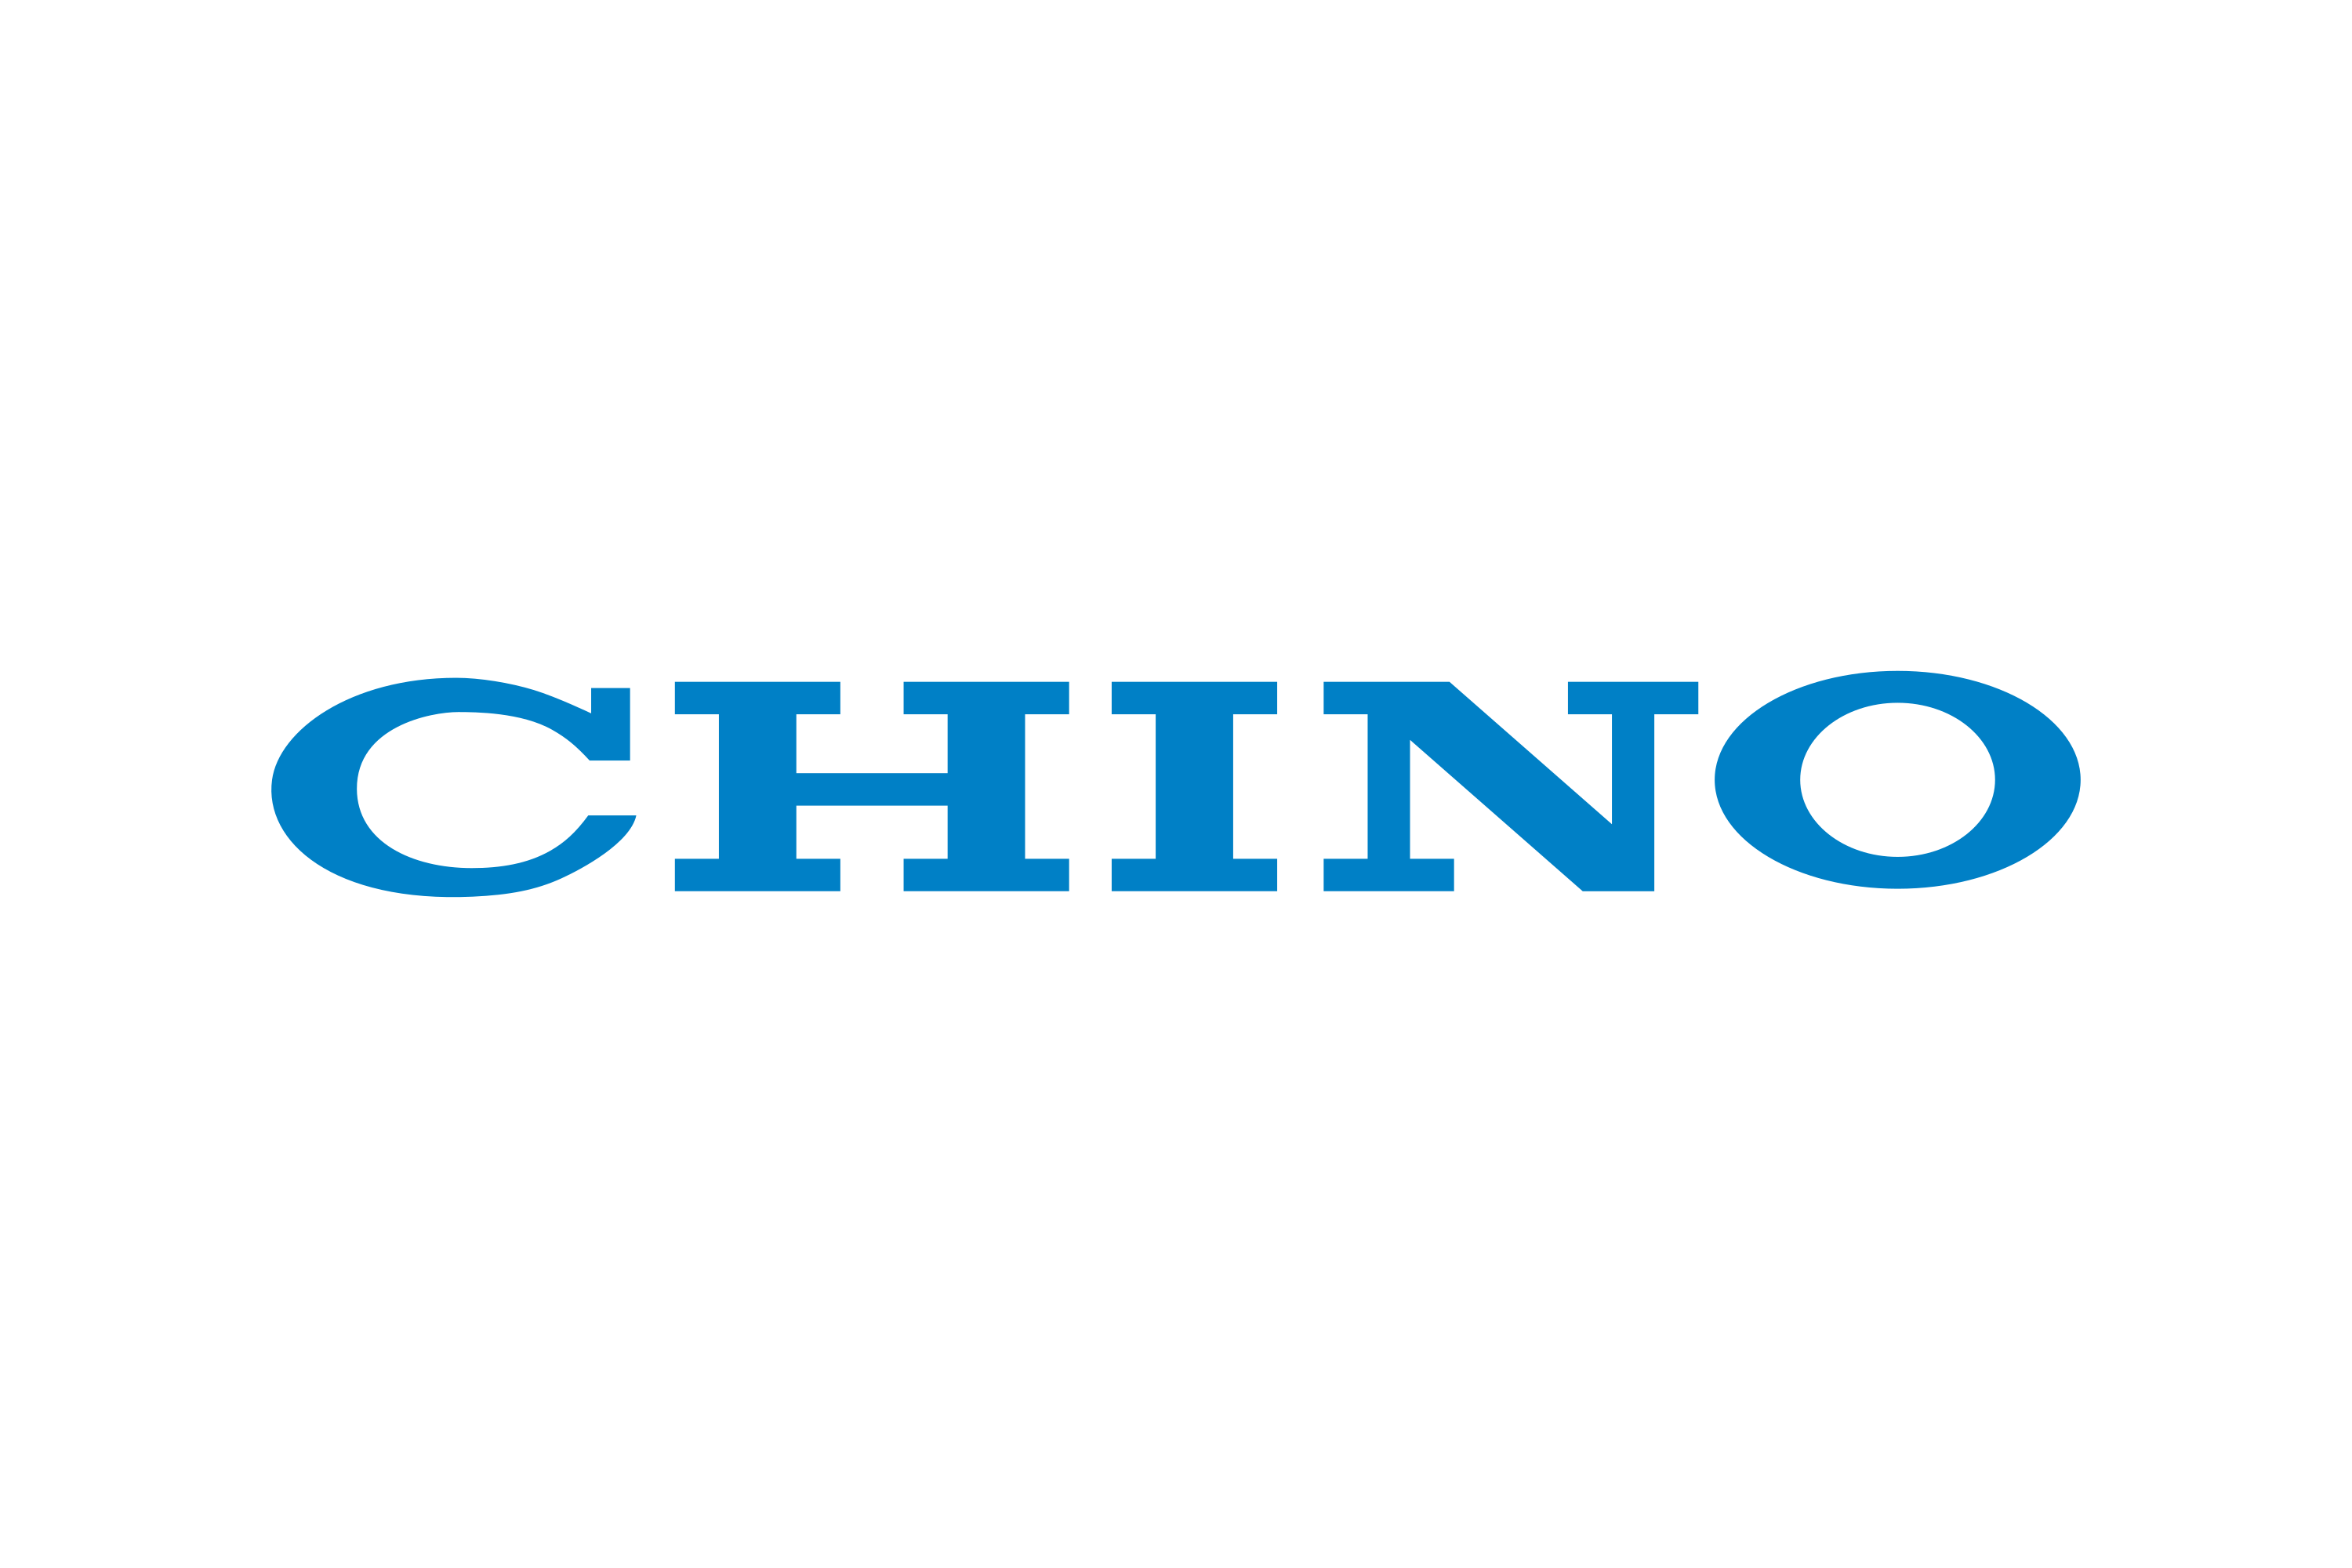 Download Chino Corporation Logo in SVG Vector or PNG File Format - Logo.wine